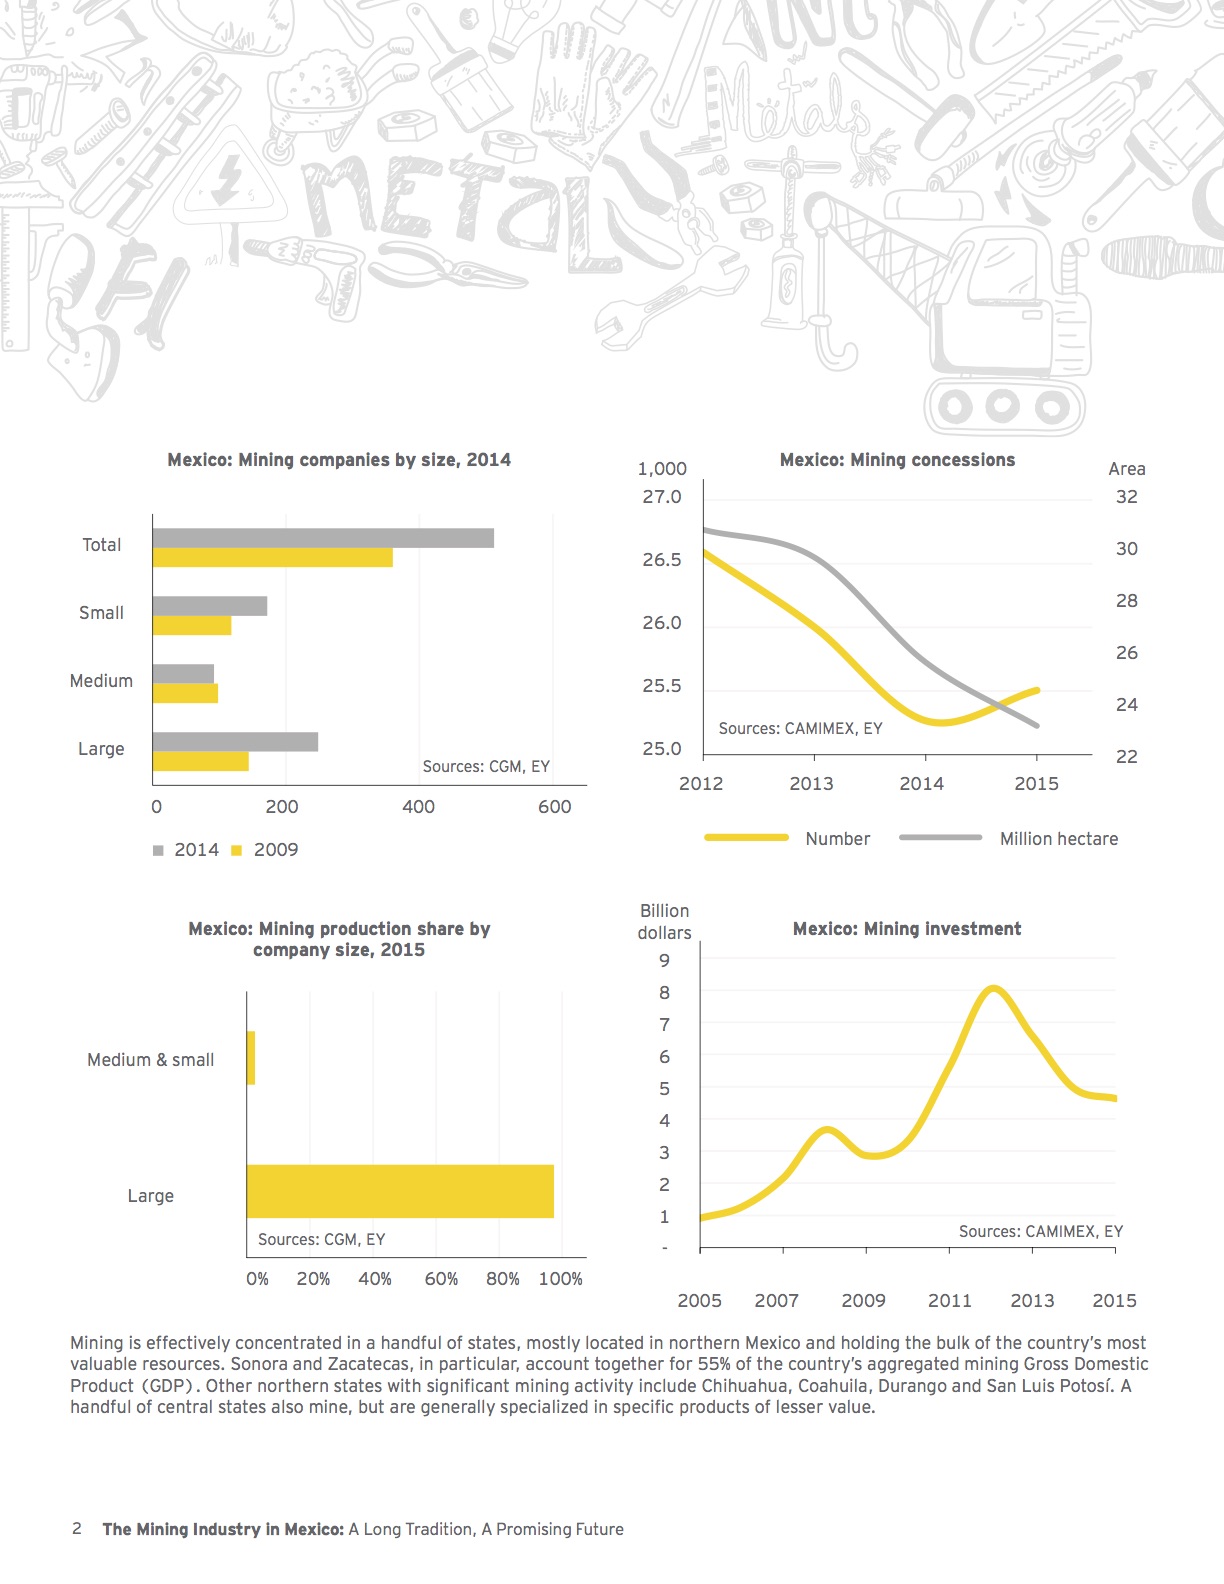 ey-the-mining-industry-in-mexico-04.jpg